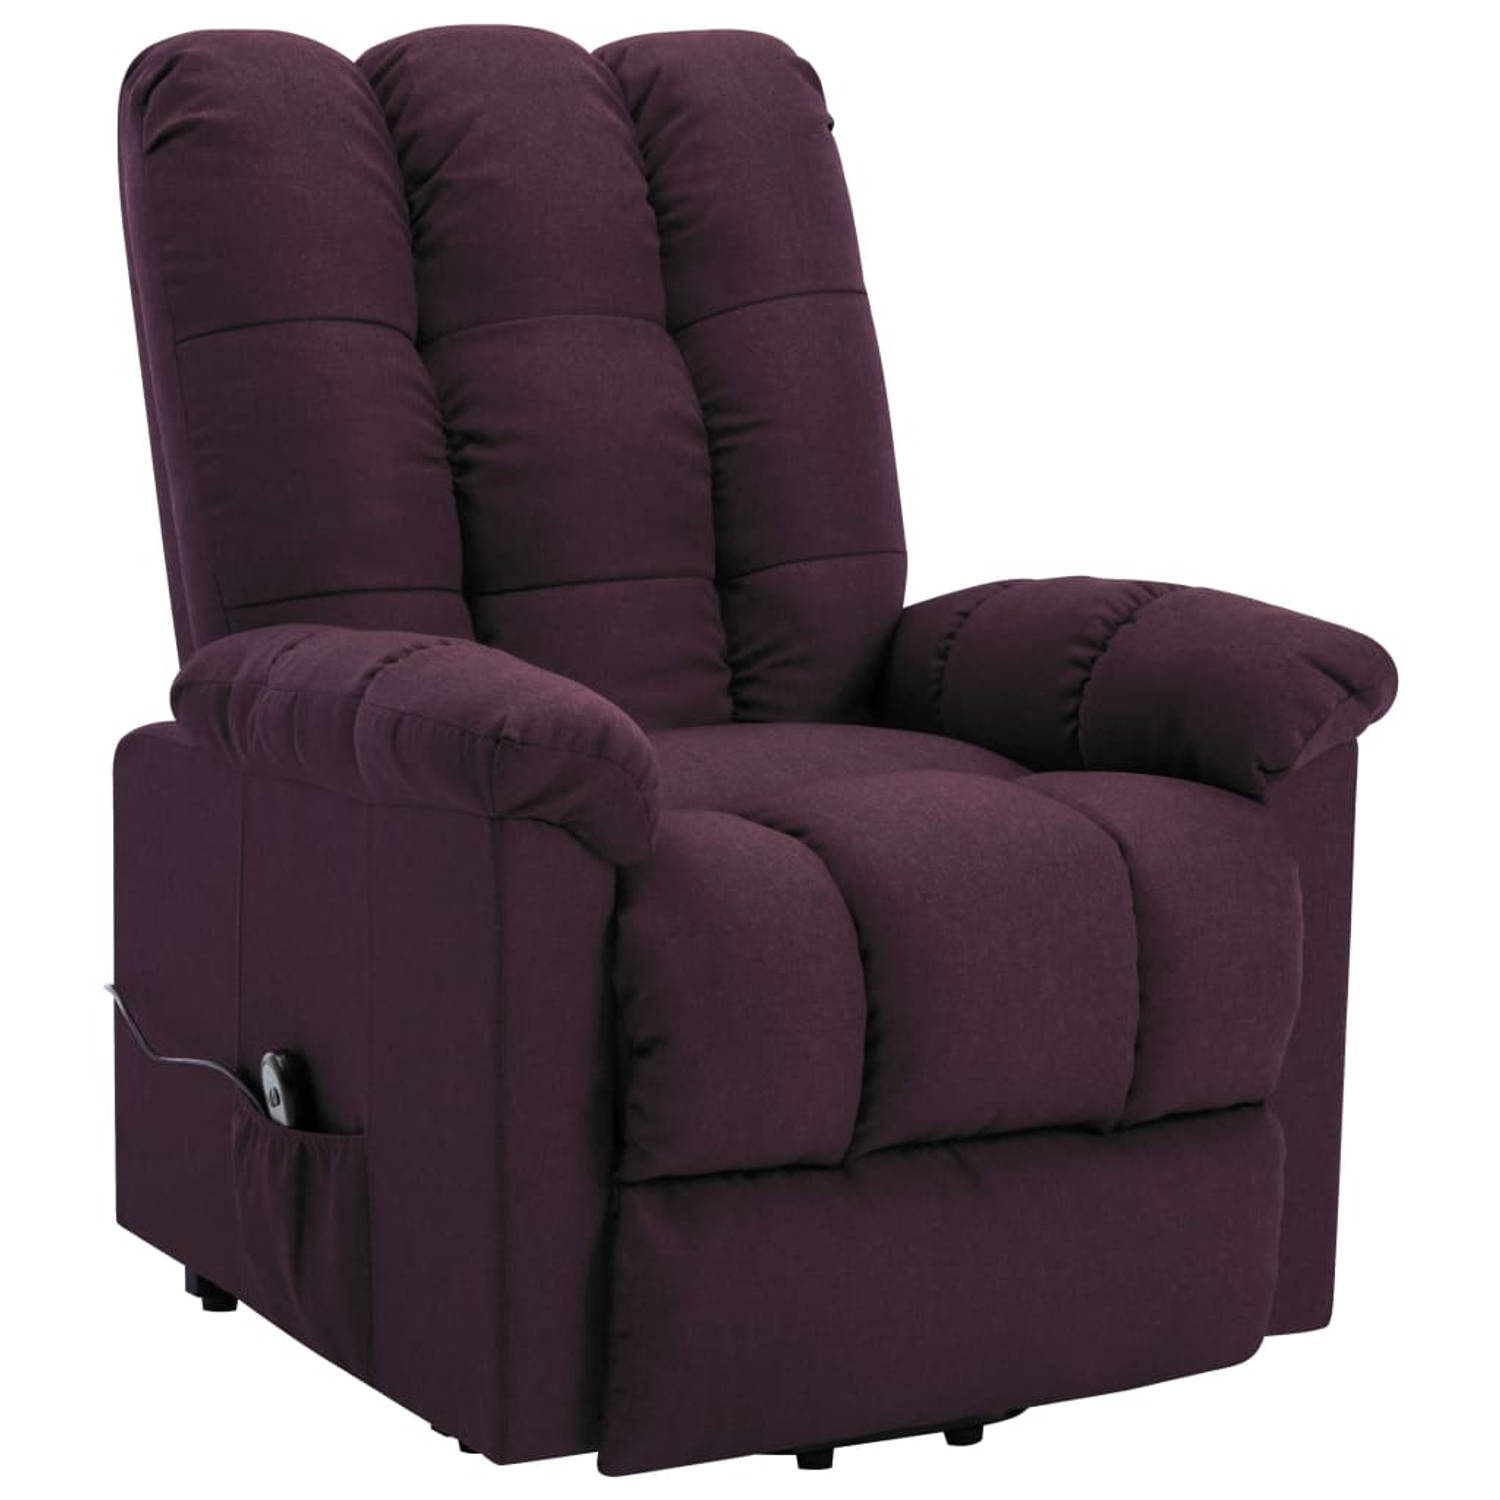 The Living Store Sta-op-stoel stof paars - Fauteuil